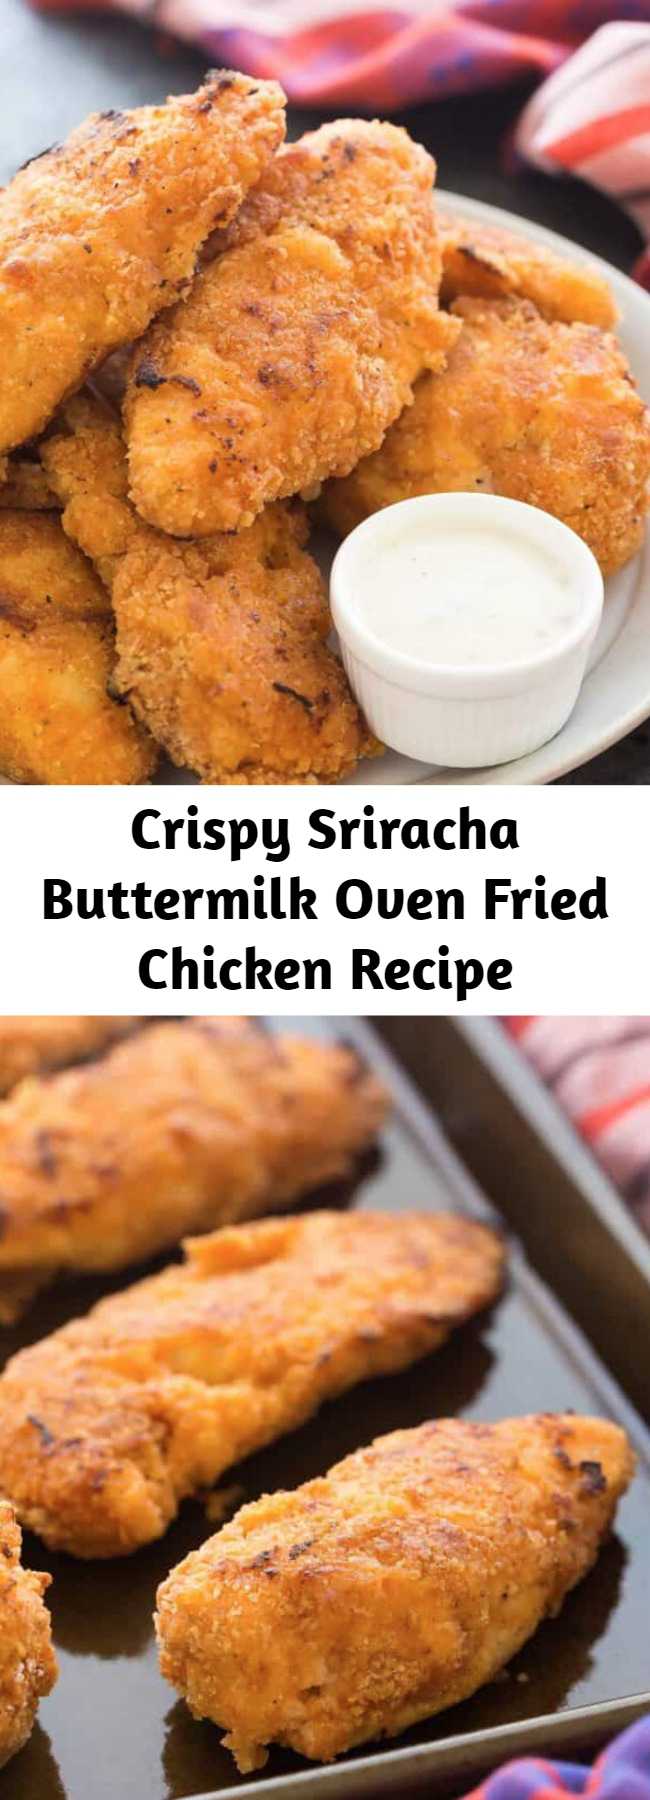 Crispy Sriracha Buttermilk Oven Fried Chicken Recipe - This Crispy Sriracha Buttermilk Oven Fried Chicken is so moist and juicy with just the right amount of spice! It’s baked and not fried so it’s healthier, but you still get that great crunchy coating. #chicken #friedchicken #dinner #appetizer #gameday #snack